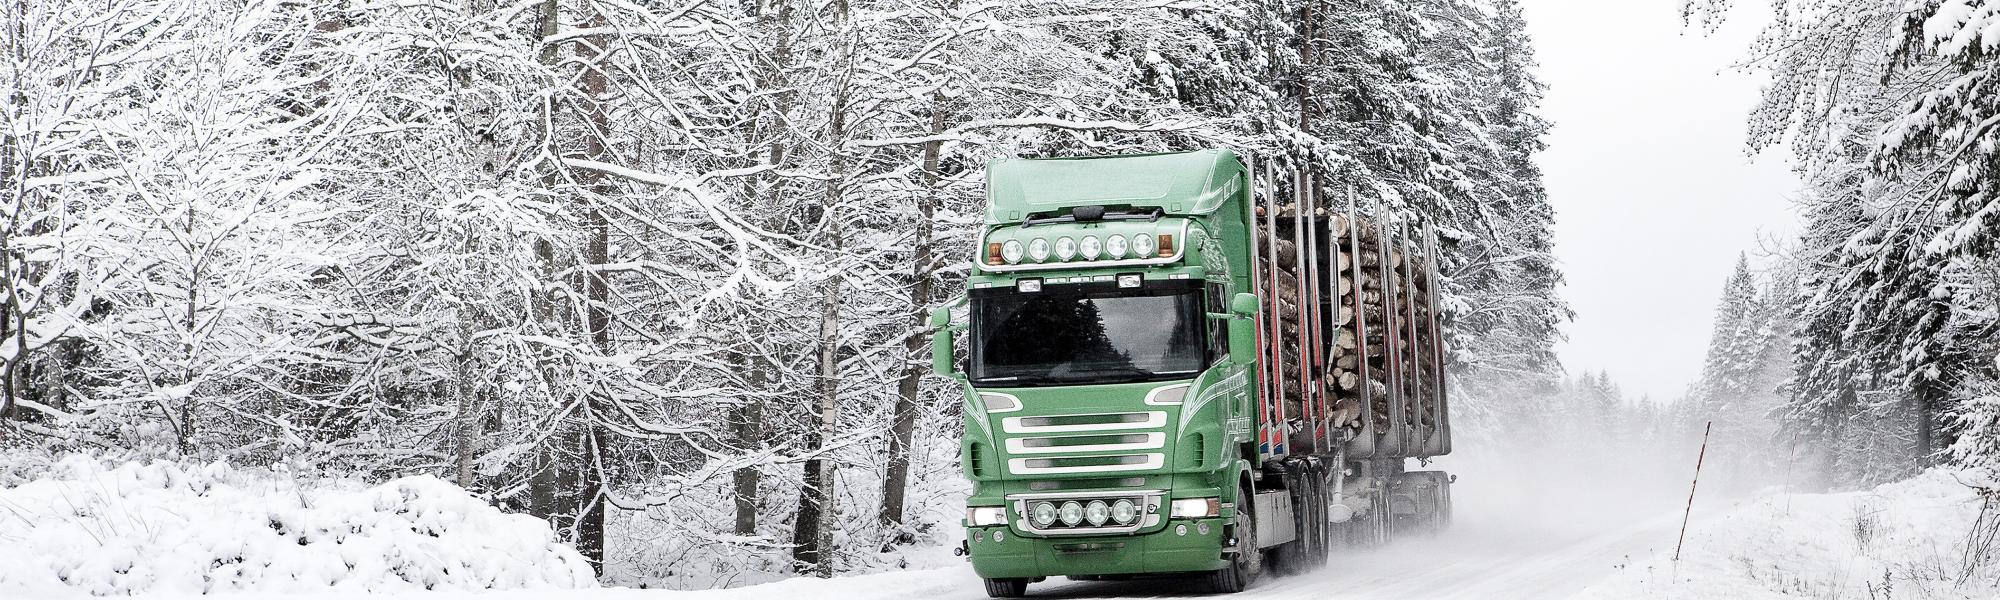 image of a truck on winter road 